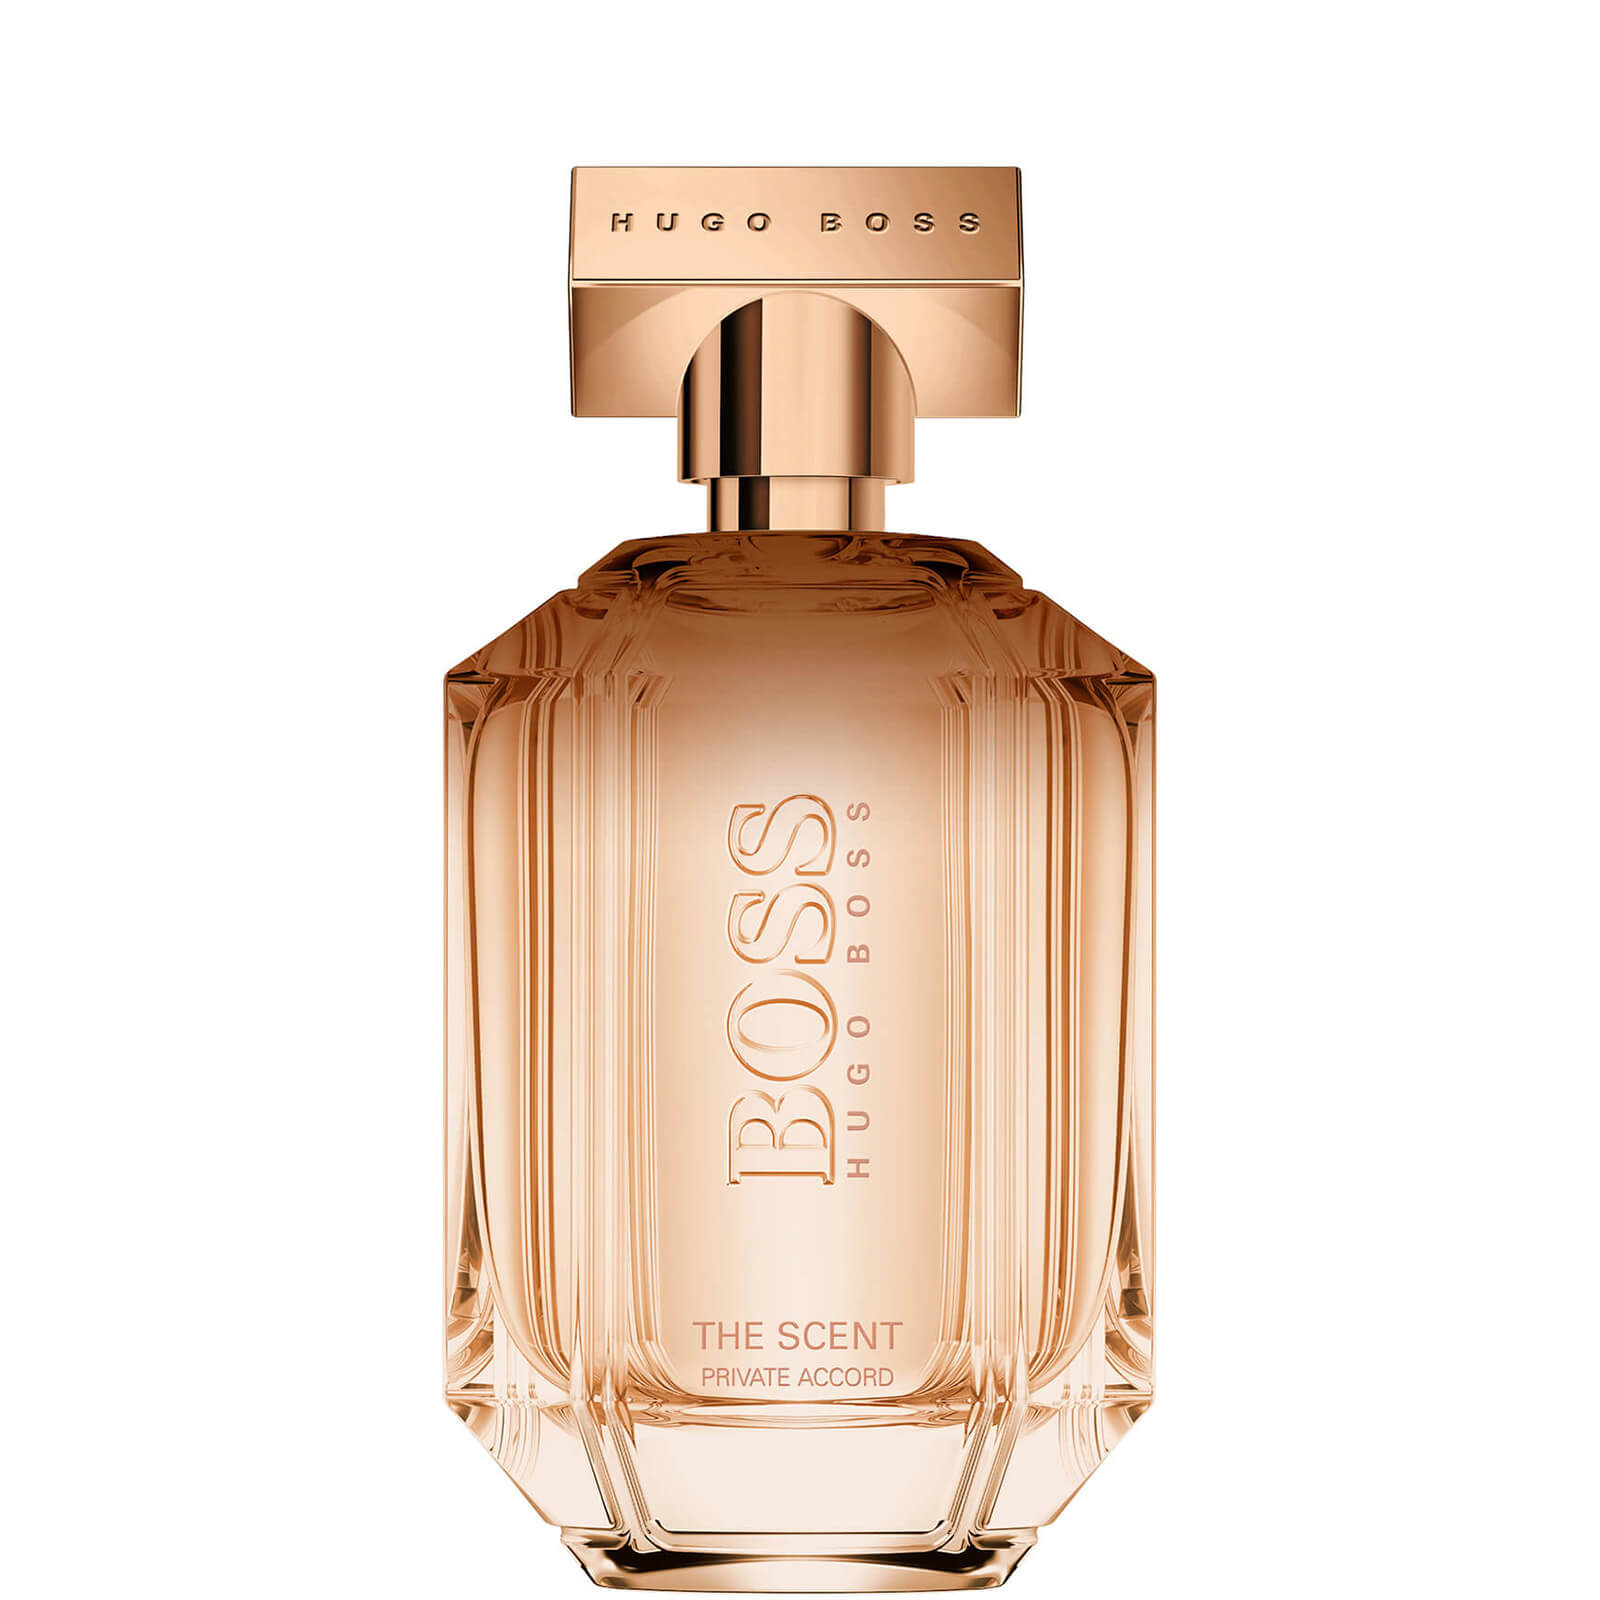 Hugo Boss BOSS The Scent Private Accord For Her Eau de Parfum 100ml